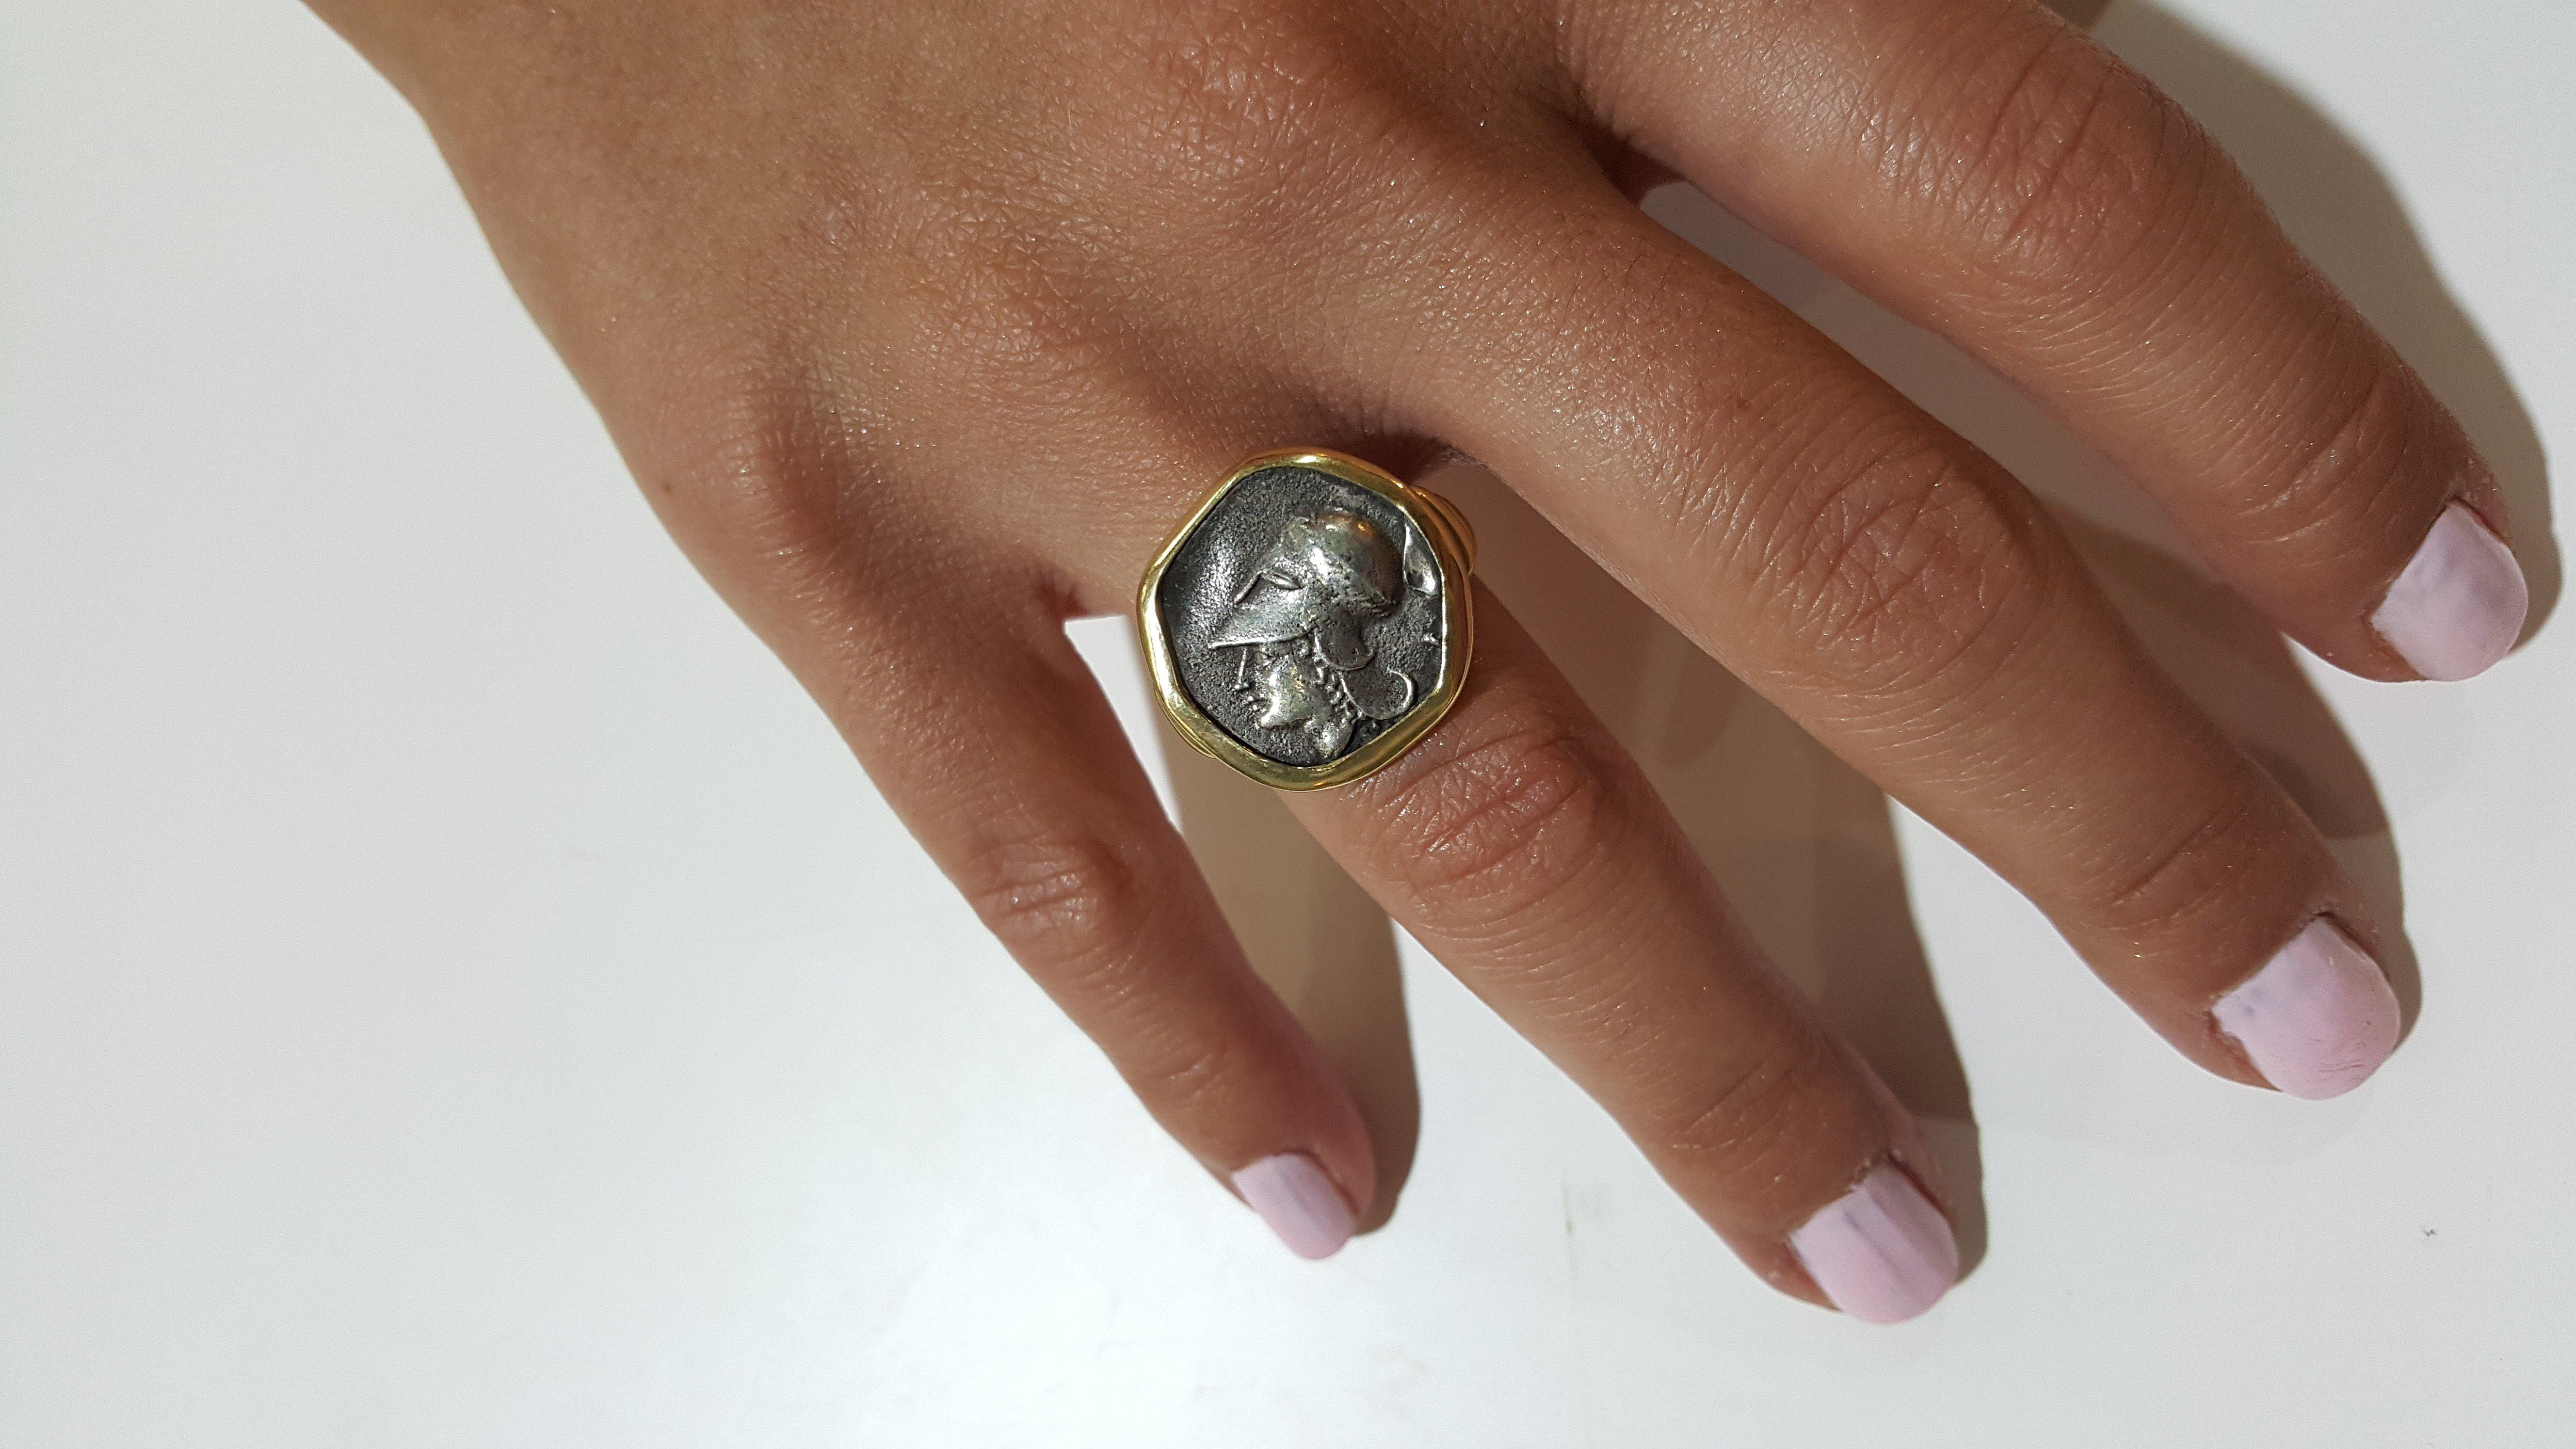 Goddess Athena Coin Ring, Handmade Ring, Gold 18k Ring, Ancient Greek Coin Ring, Unisex Ring, Greek Jewelry,greek gods jewelry